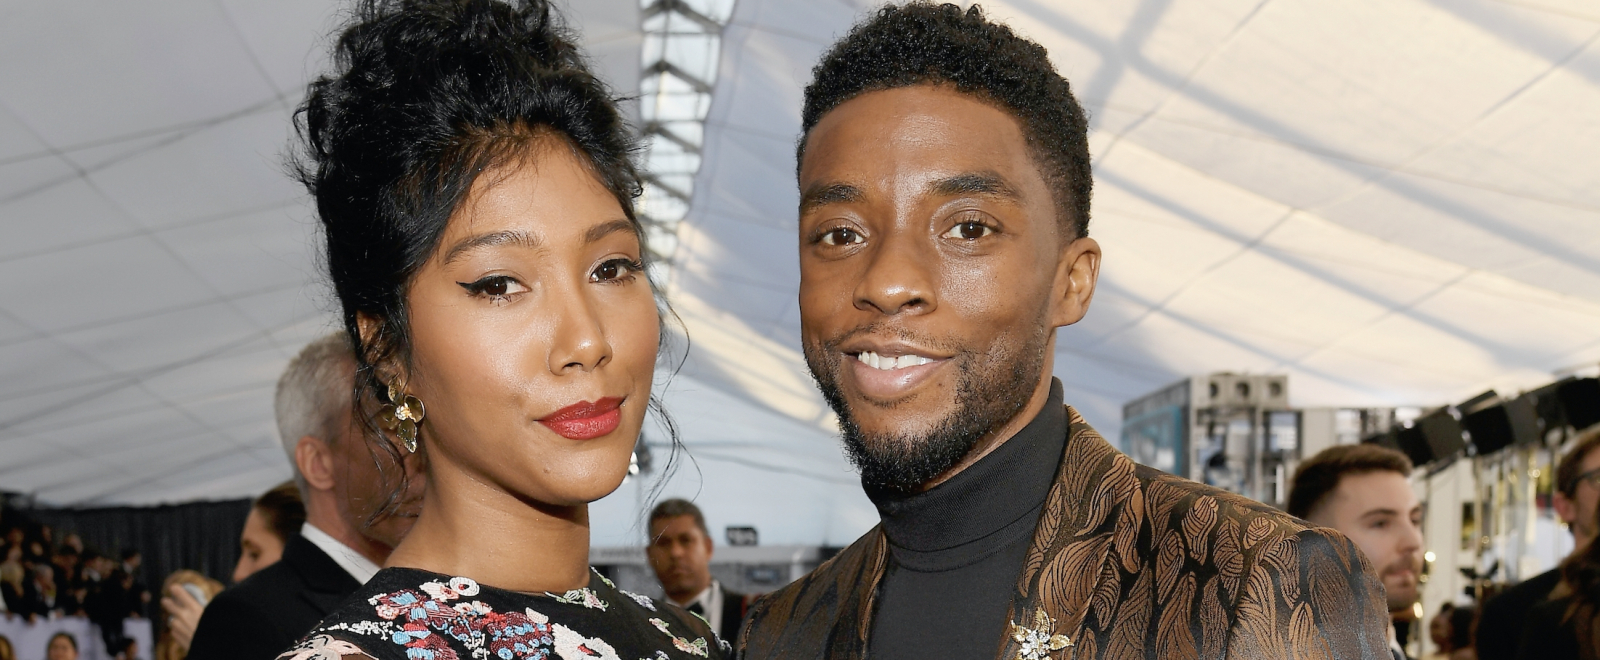 Chadwick Boseman’s Wife Gave An Emotional Speech About Her Late Husband: ‘Keep Shining Your Light On Us’